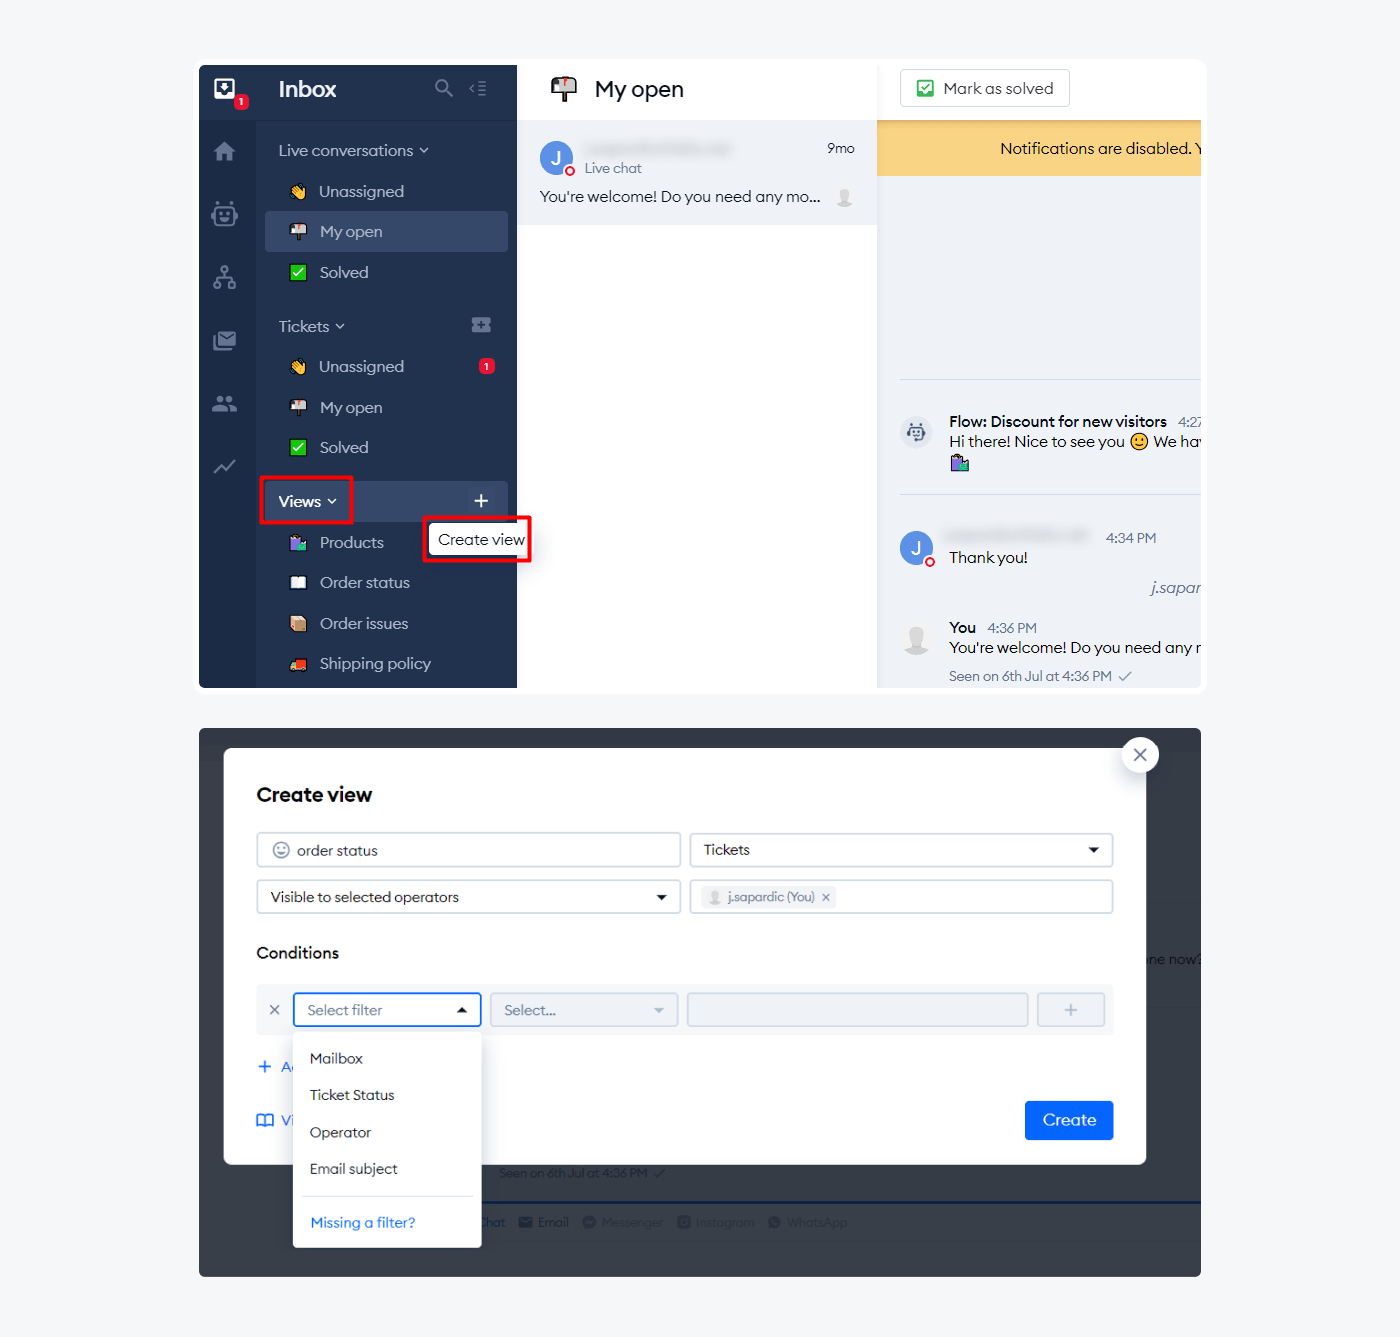 How to set up a ticket distribution?